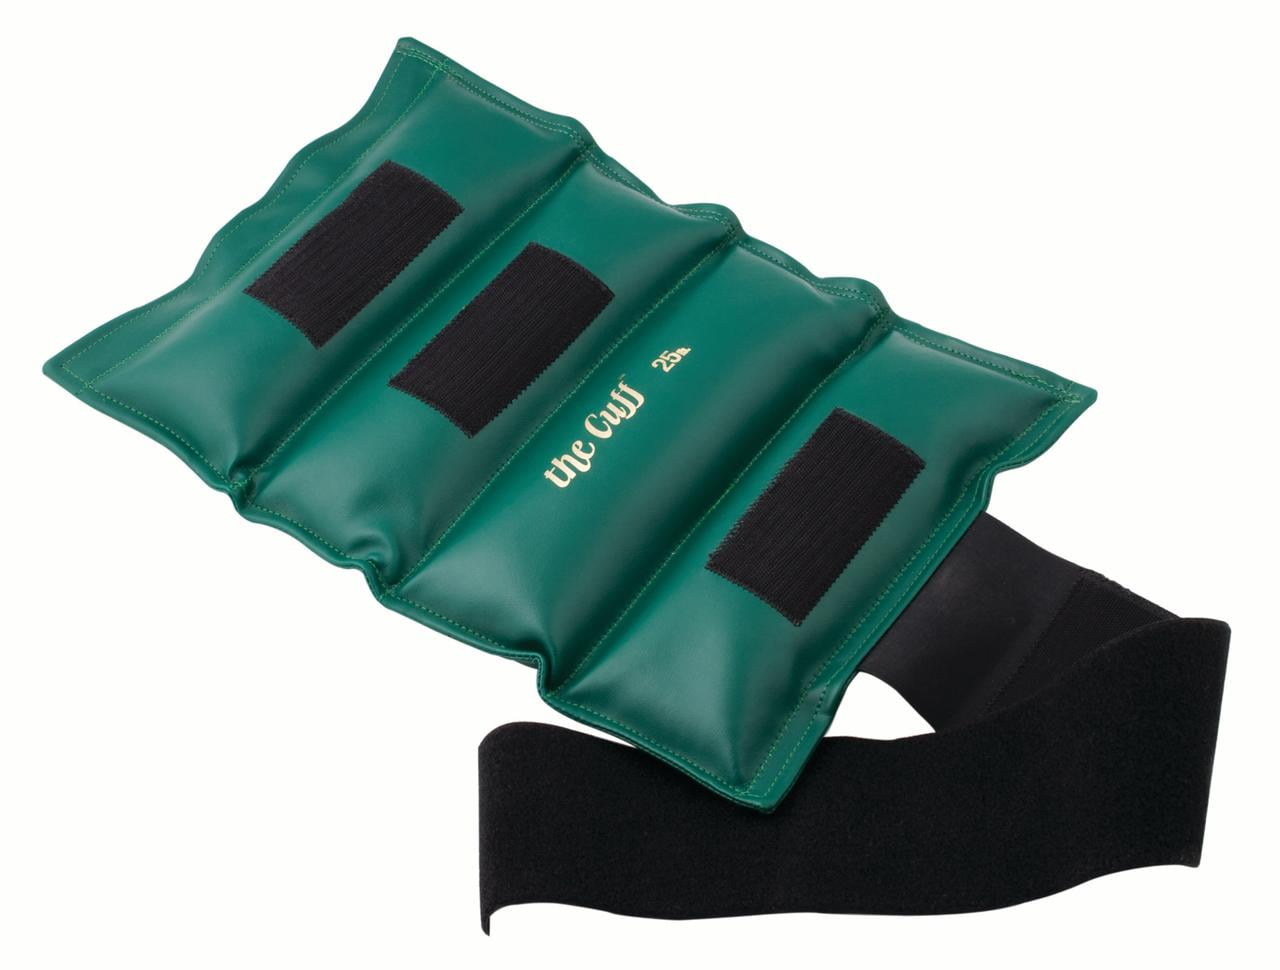 5 x 5 lb Inserts Green 25 lb the Cuff 10-0305 Pouch Variable Wrist and Ankle Weight